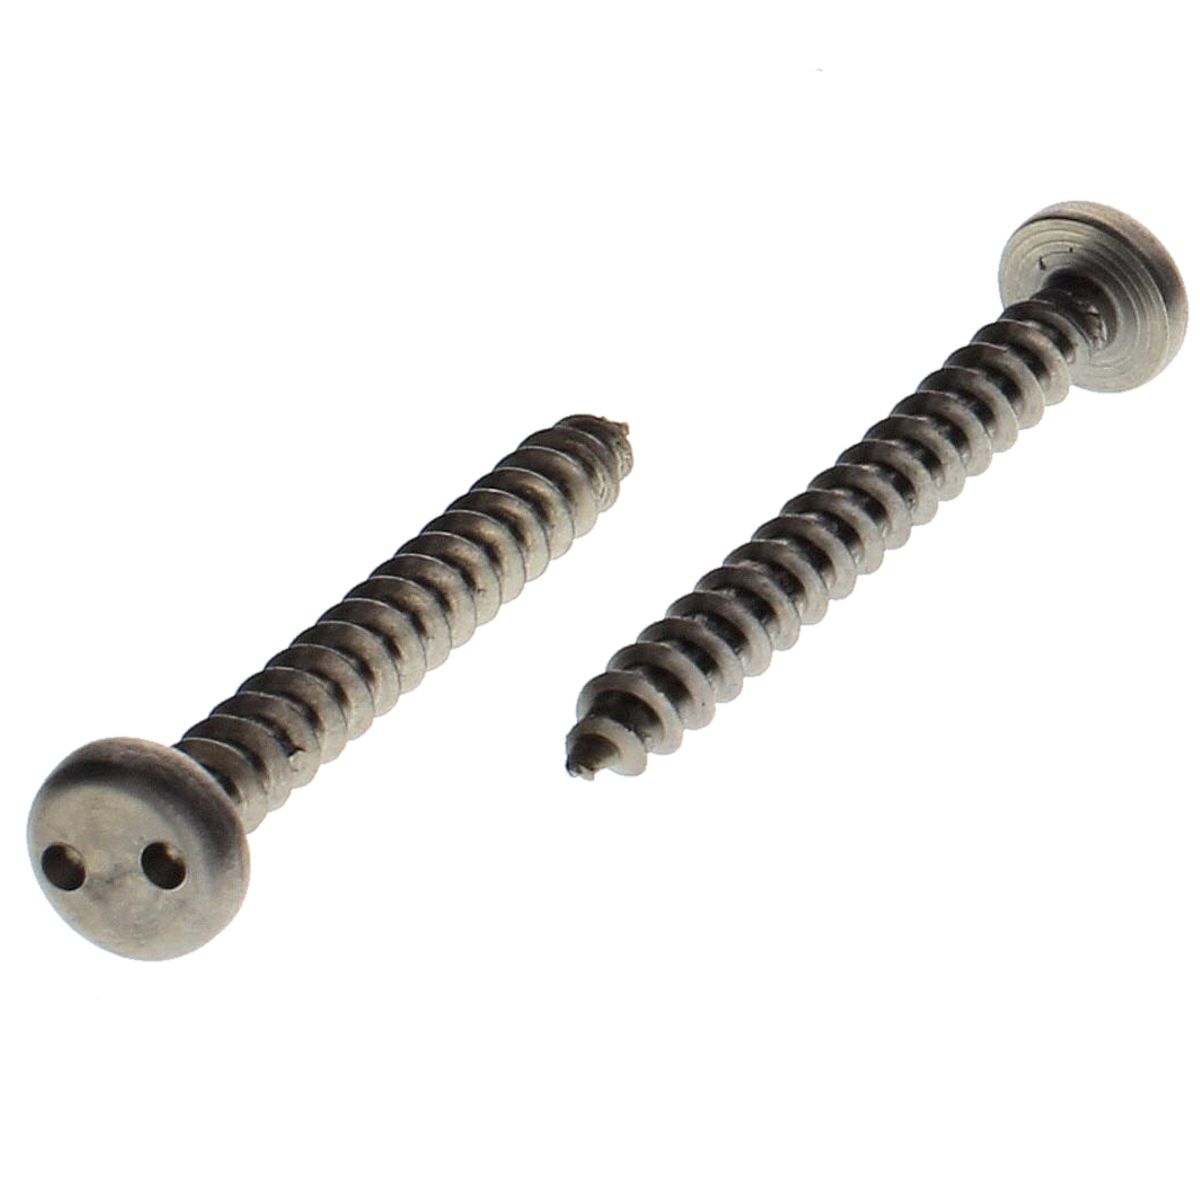 #10 x 1-1/2" Pan Head Spanner Security Tapping Screws — 18-8 Stainless Steel, 100/PKG